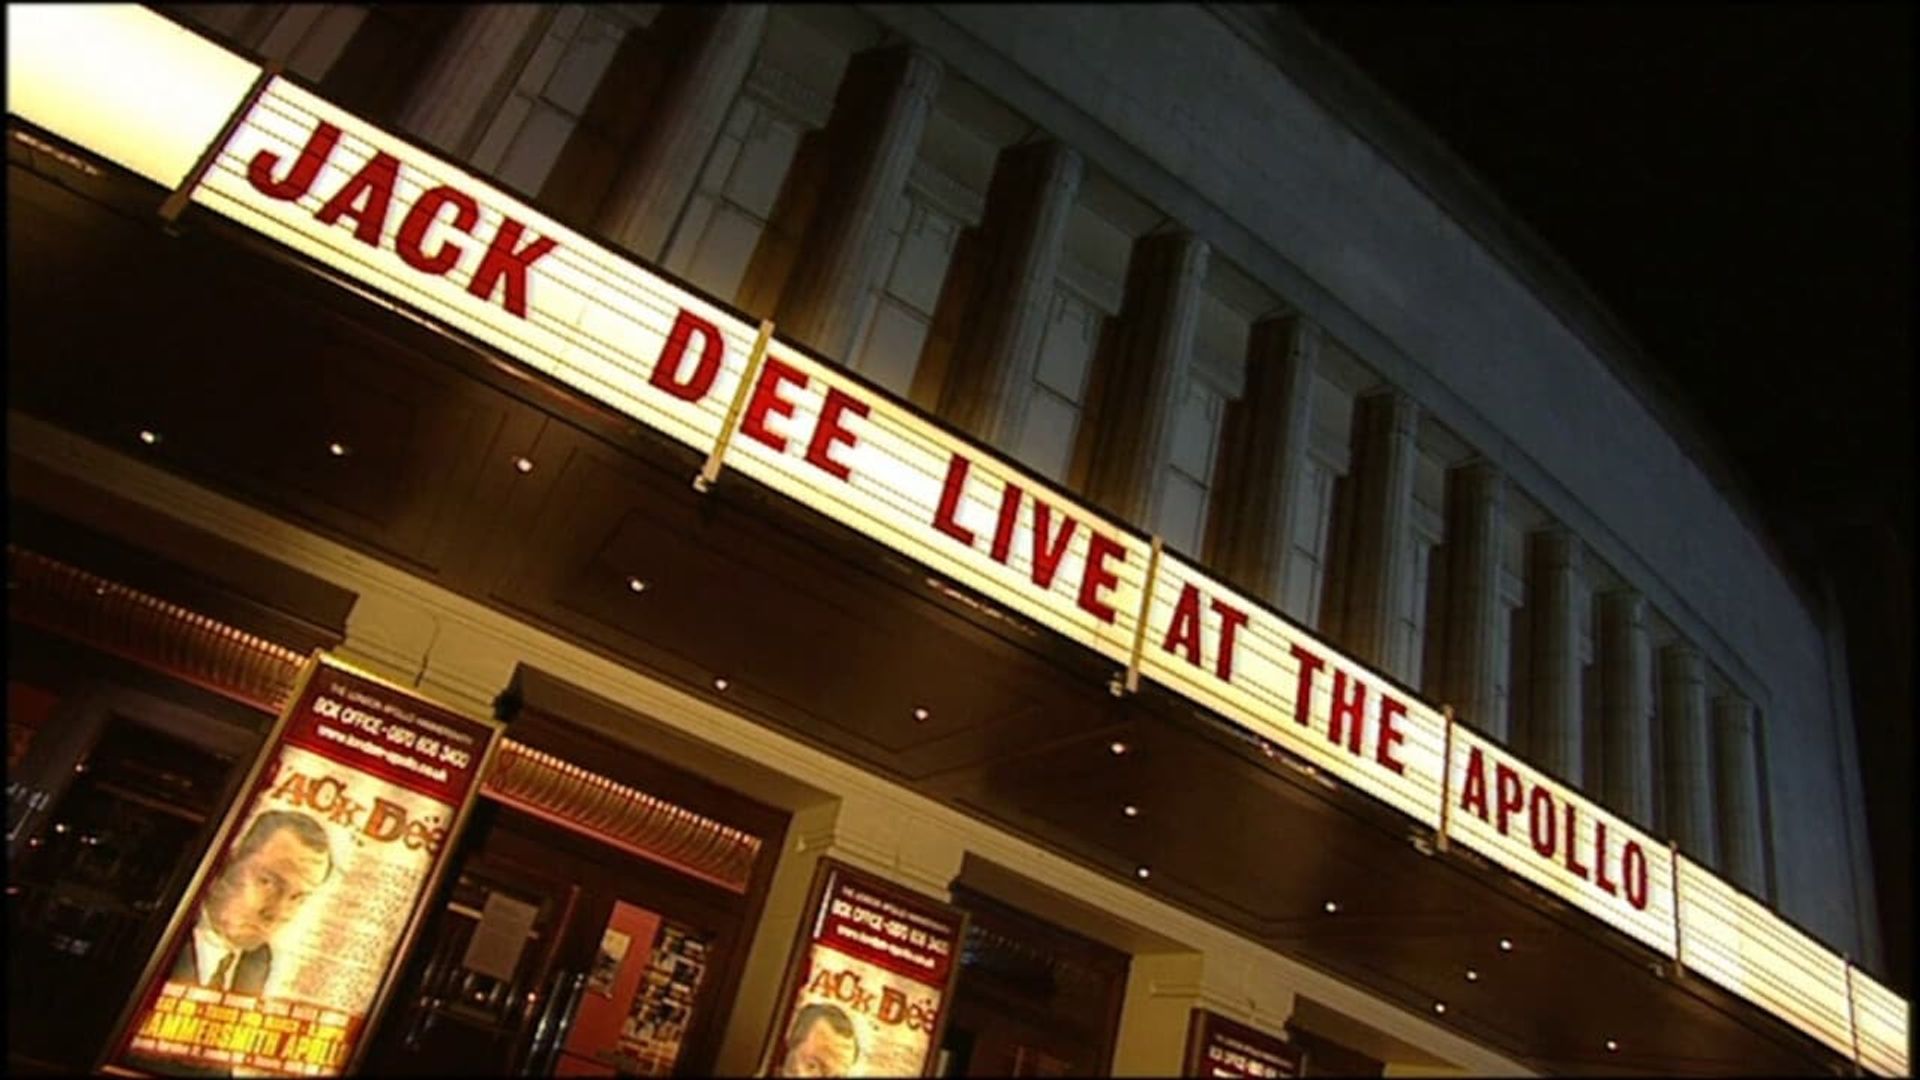 Jack Dee: Live at the Apollo background